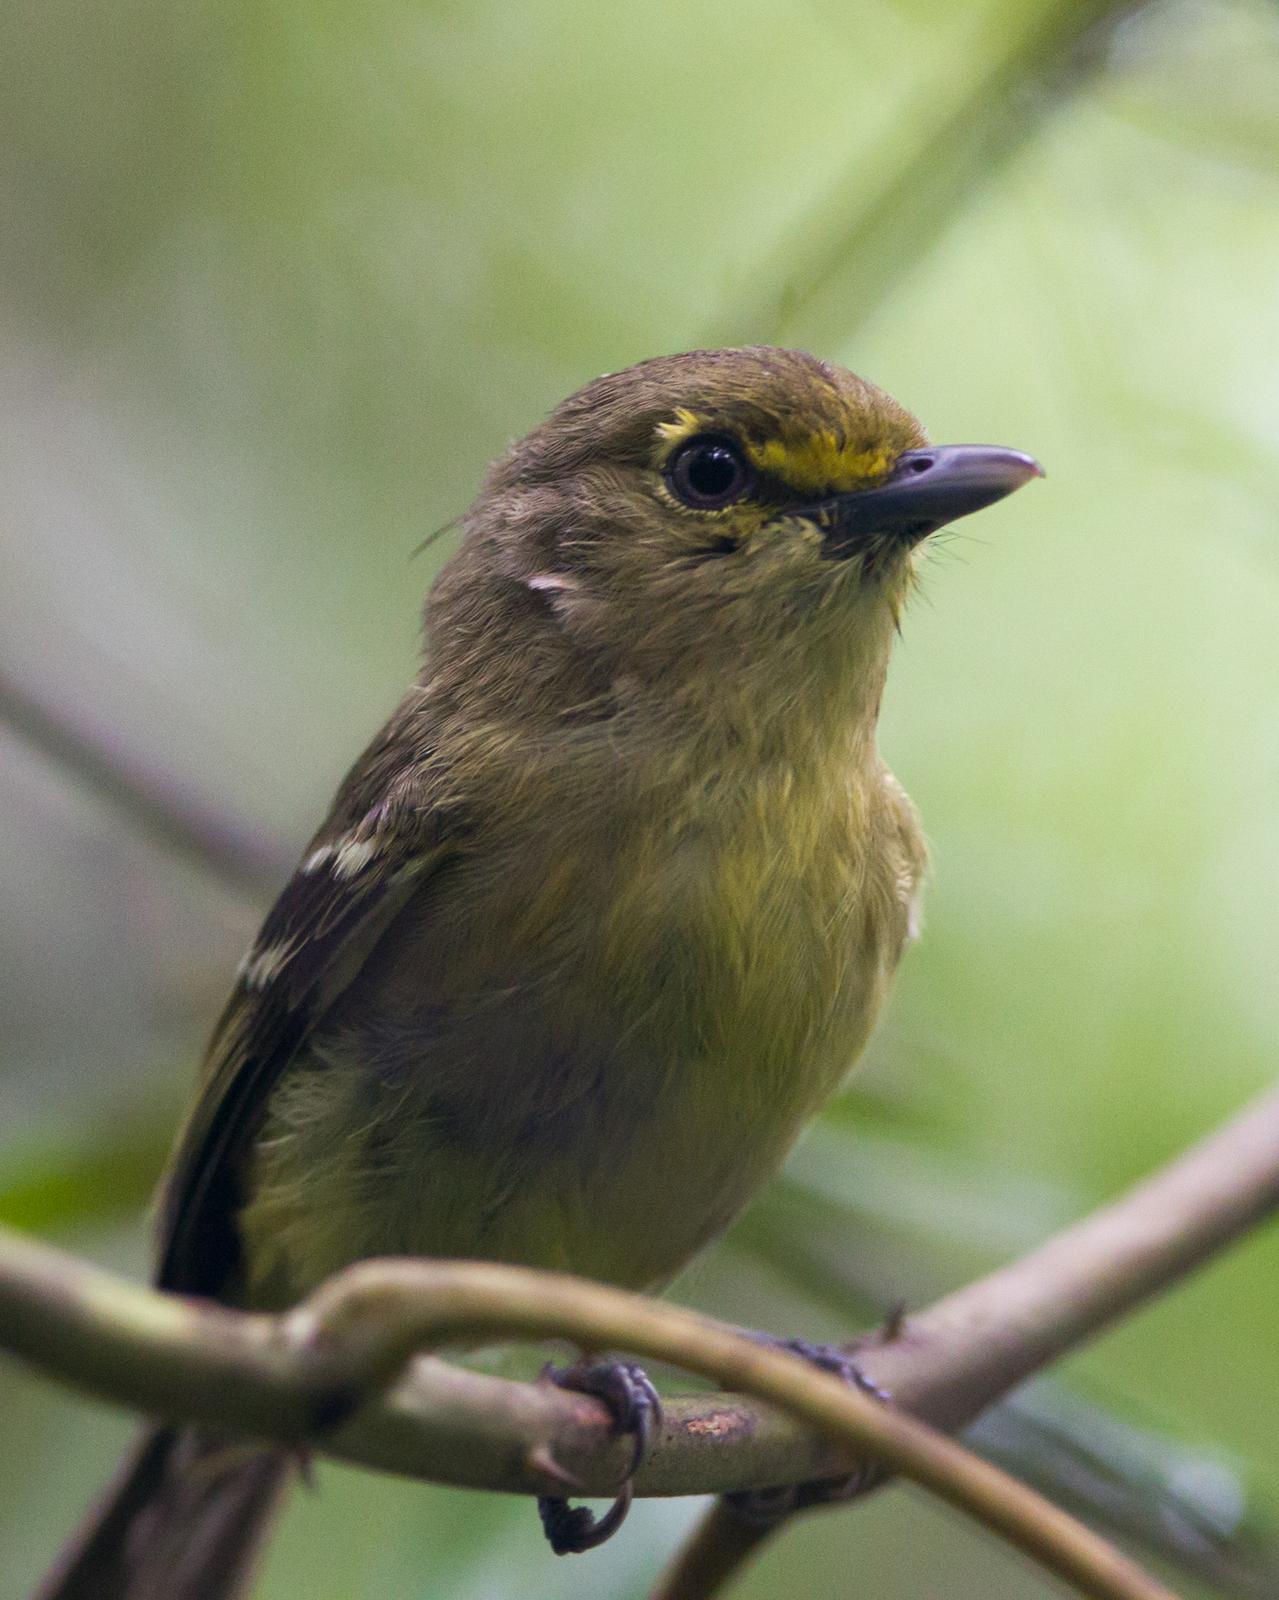 Thick-billed Vireo Photo by Kevin Berkoff